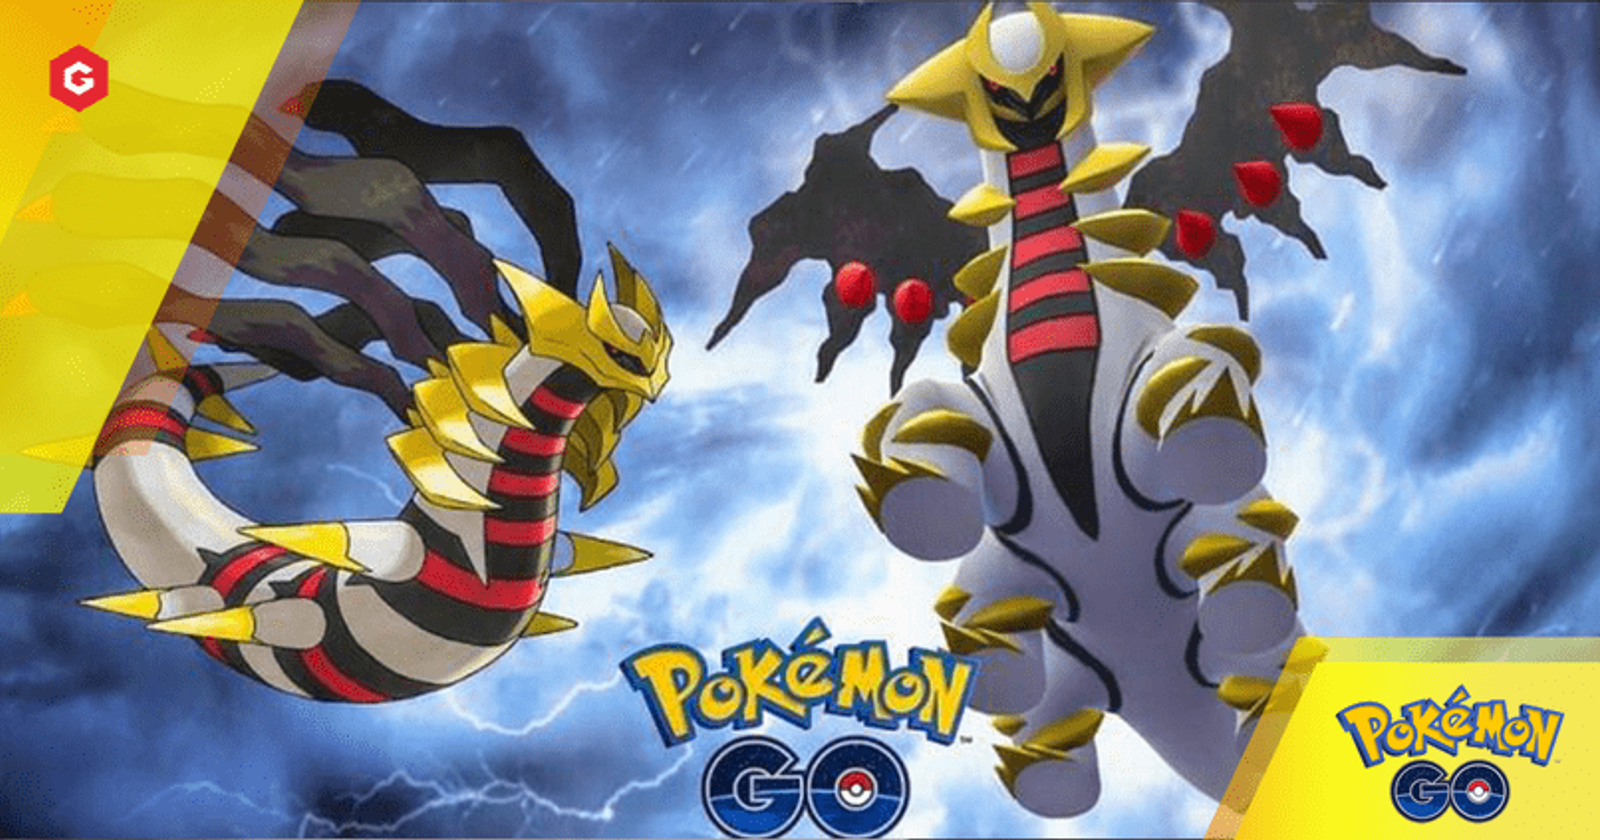 Palkia - Shiny, Counters, Weakness, Moveset, and More in Pokemon Go